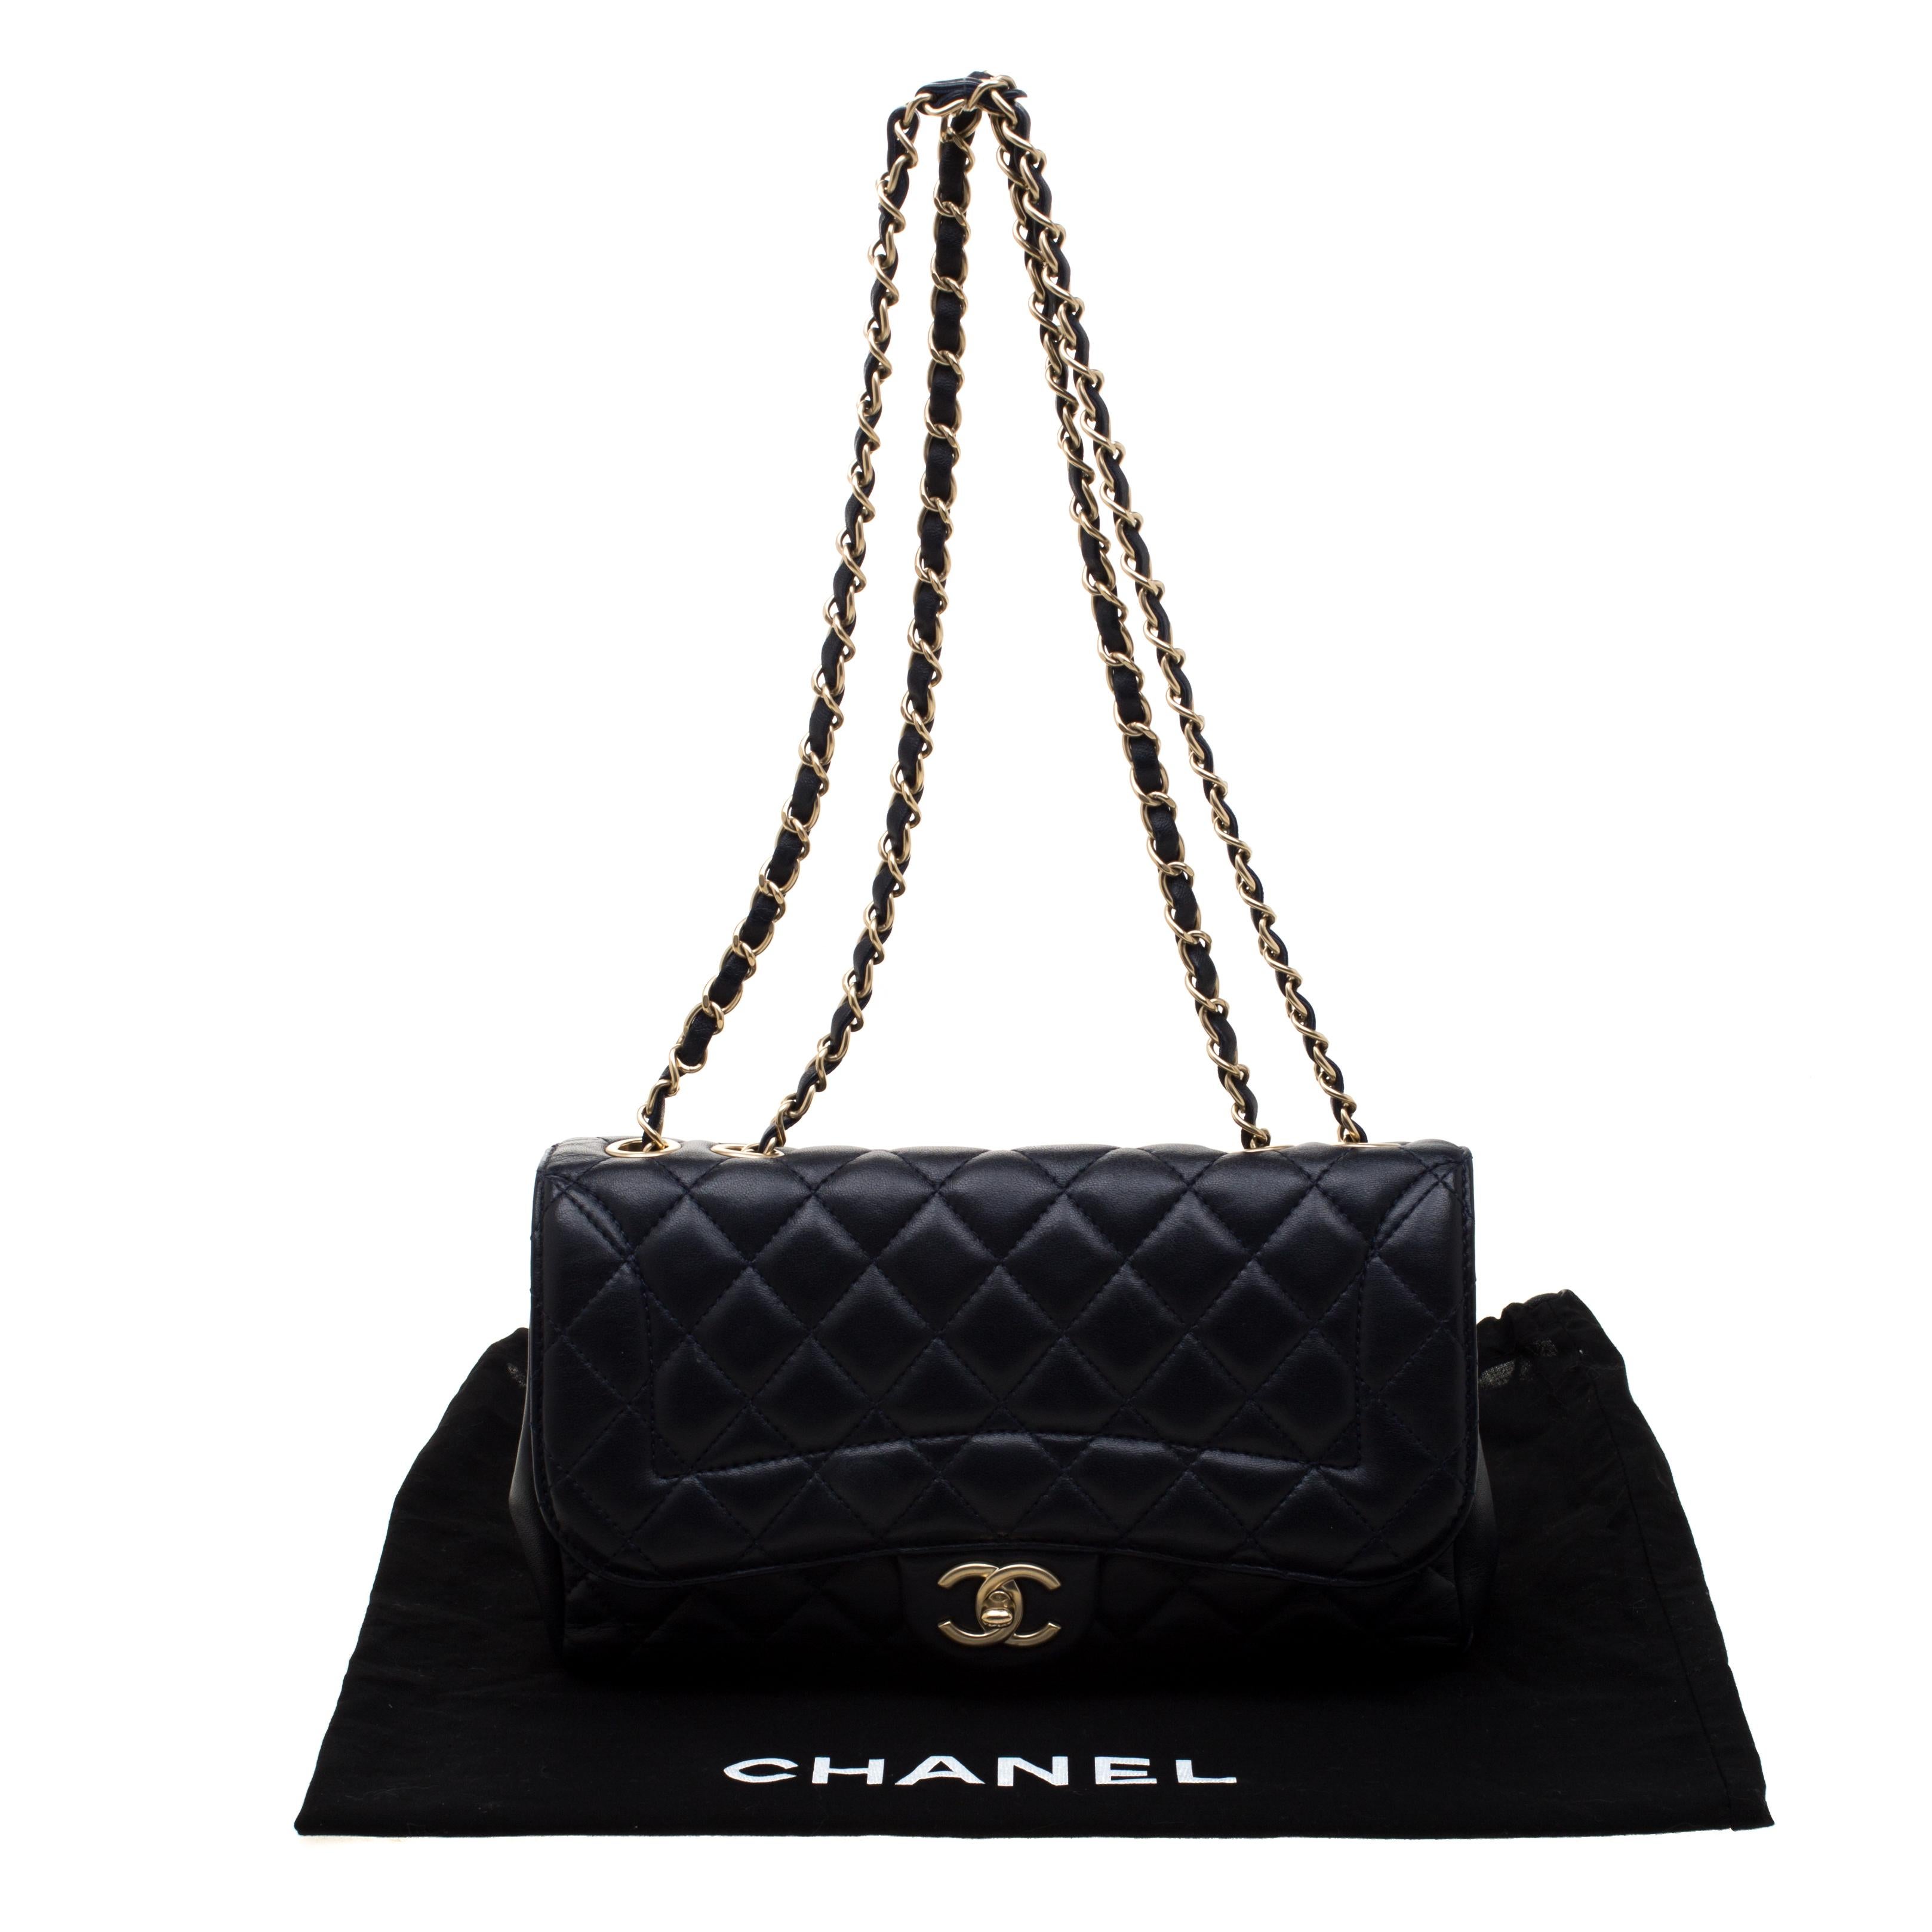 Chanel Navy Blue Quilted Leather Mademoiselle Chic Flap Shoulder Bag 7